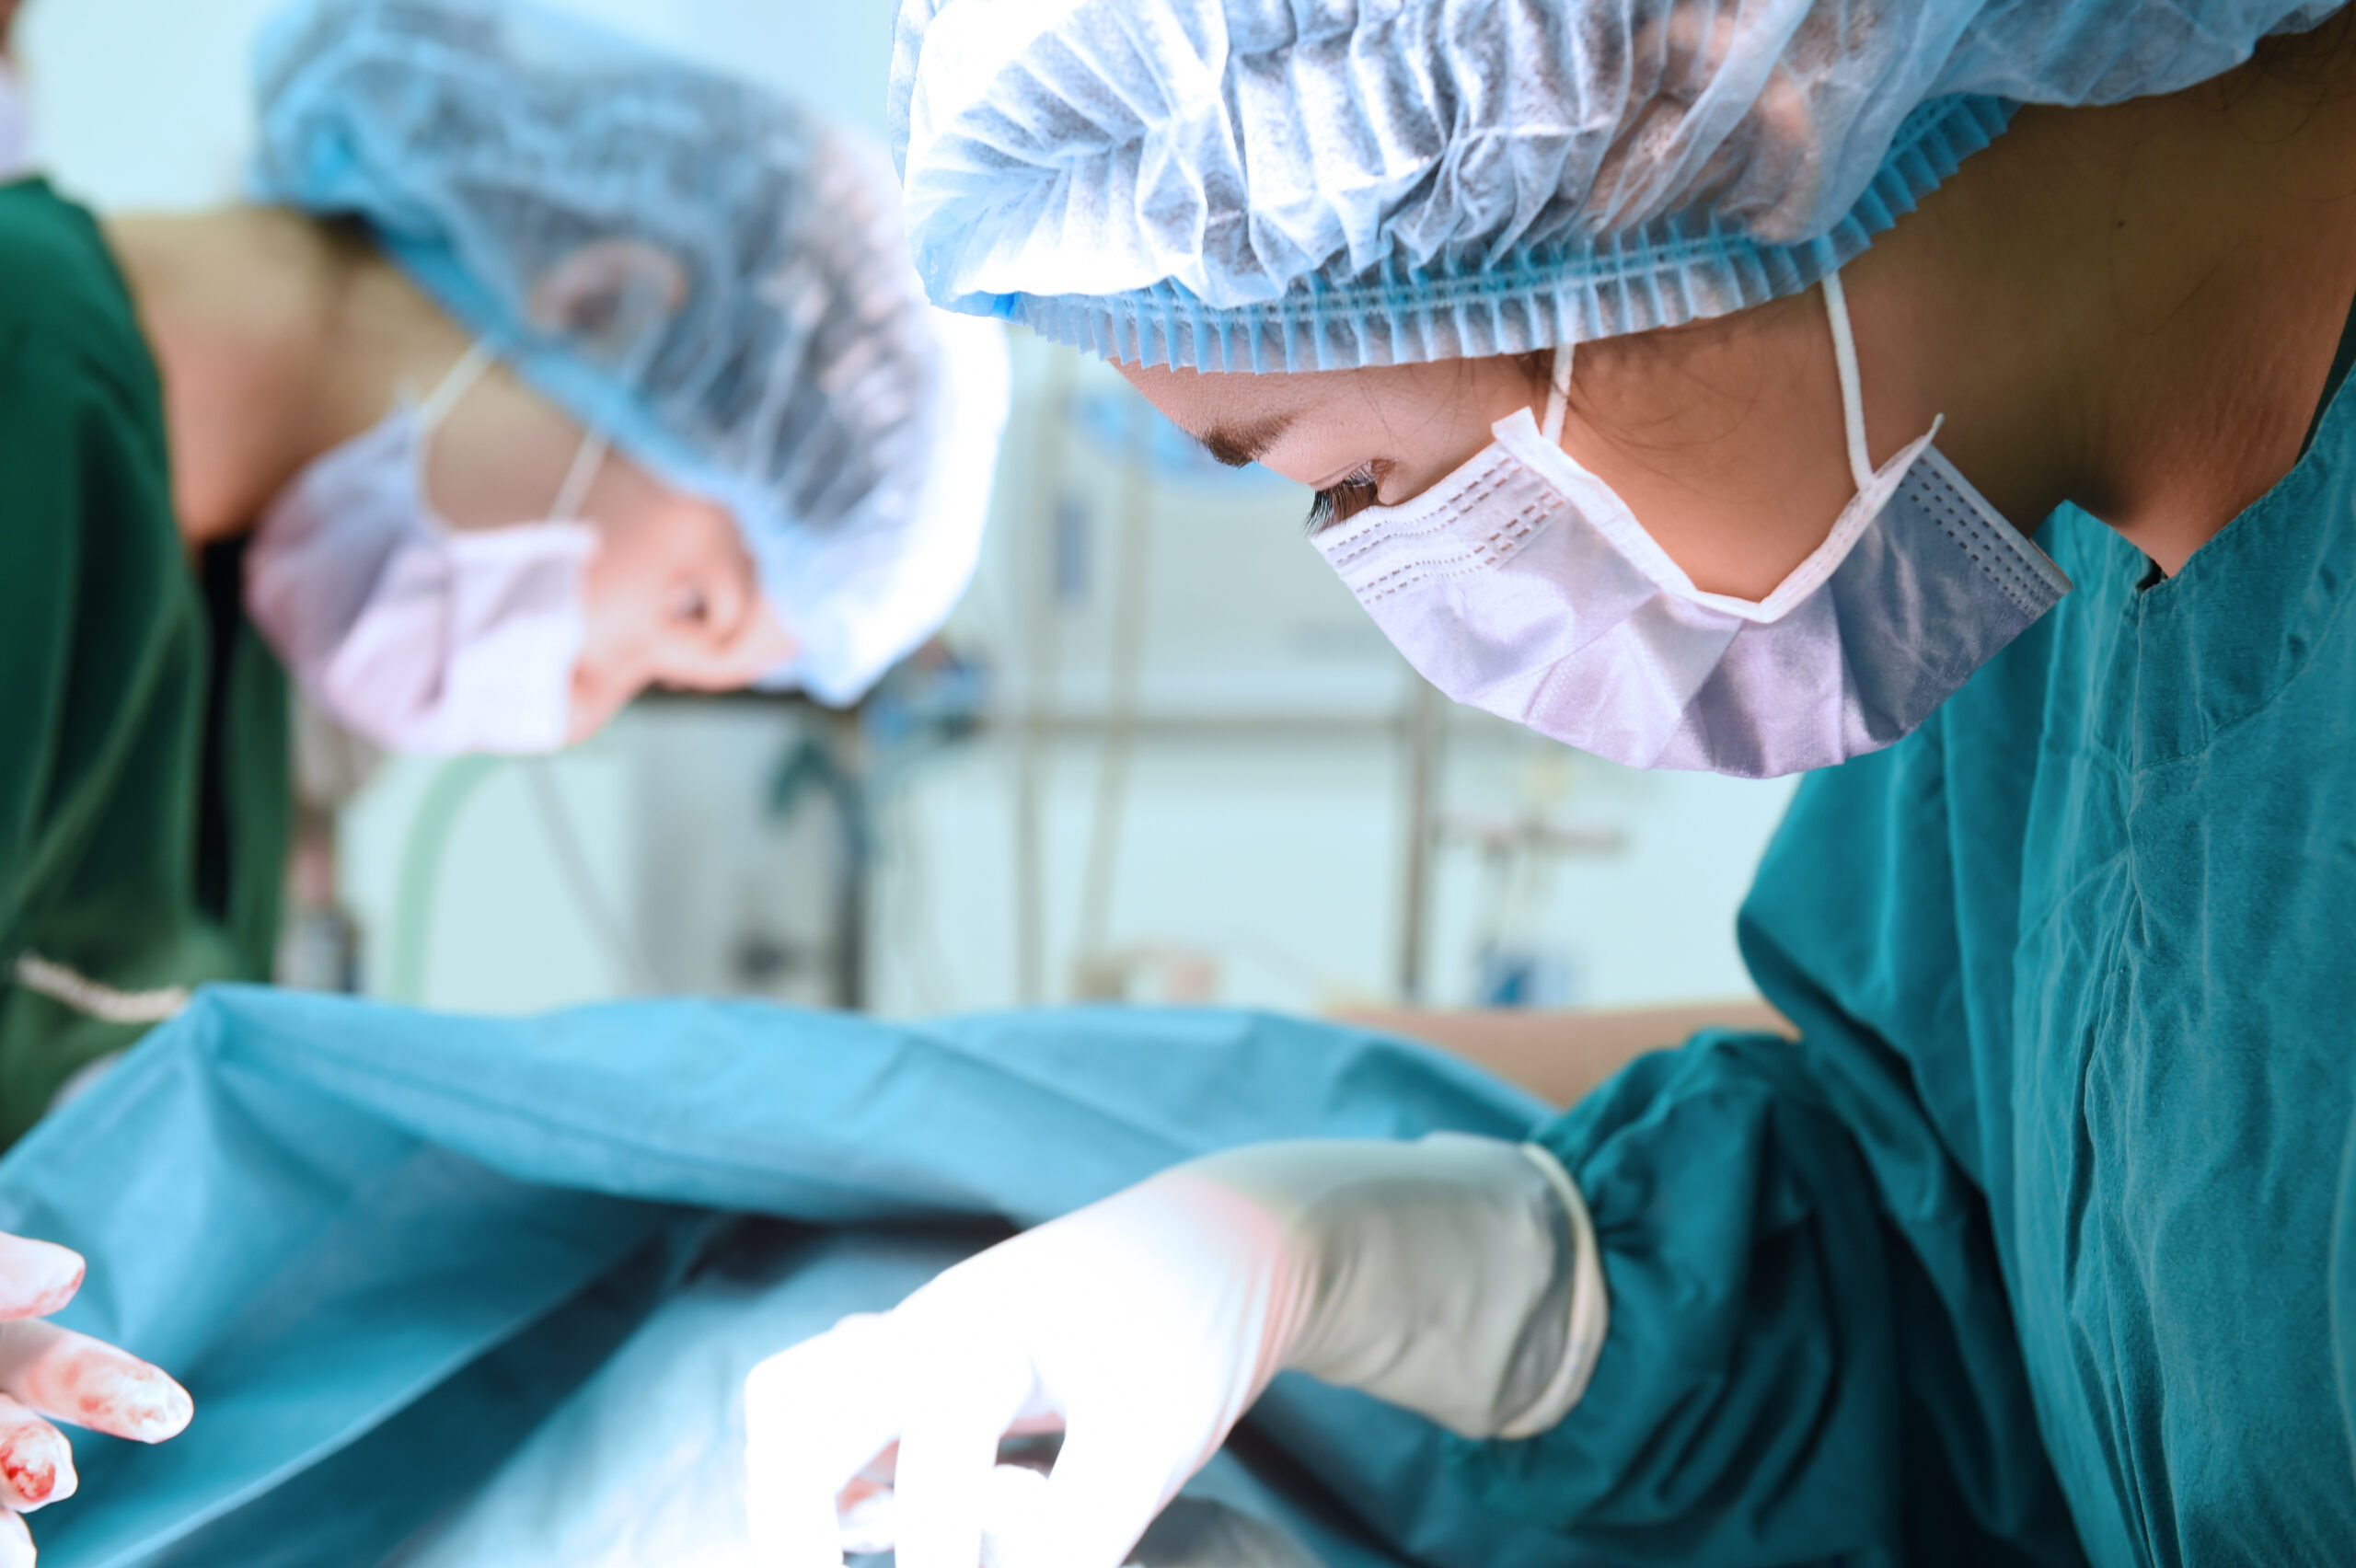 Three Keys to Optimizing Efficiency and Productivity in the Operating Room